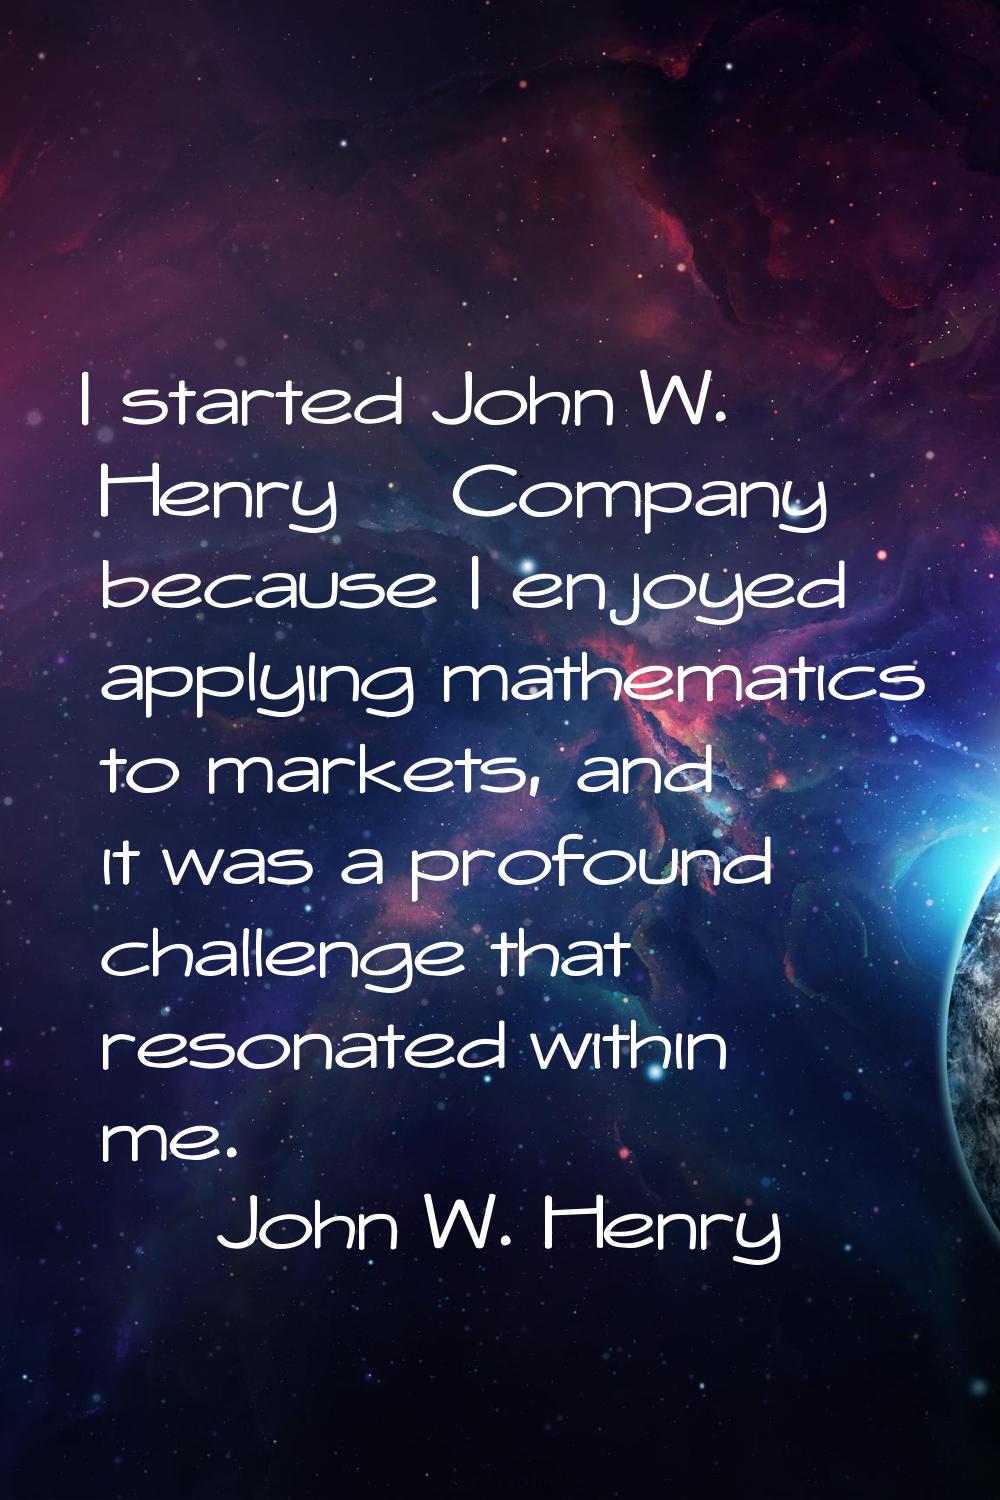 I started John W. Henry & Company because I enjoyed applying mathematics to markets, and it was a p